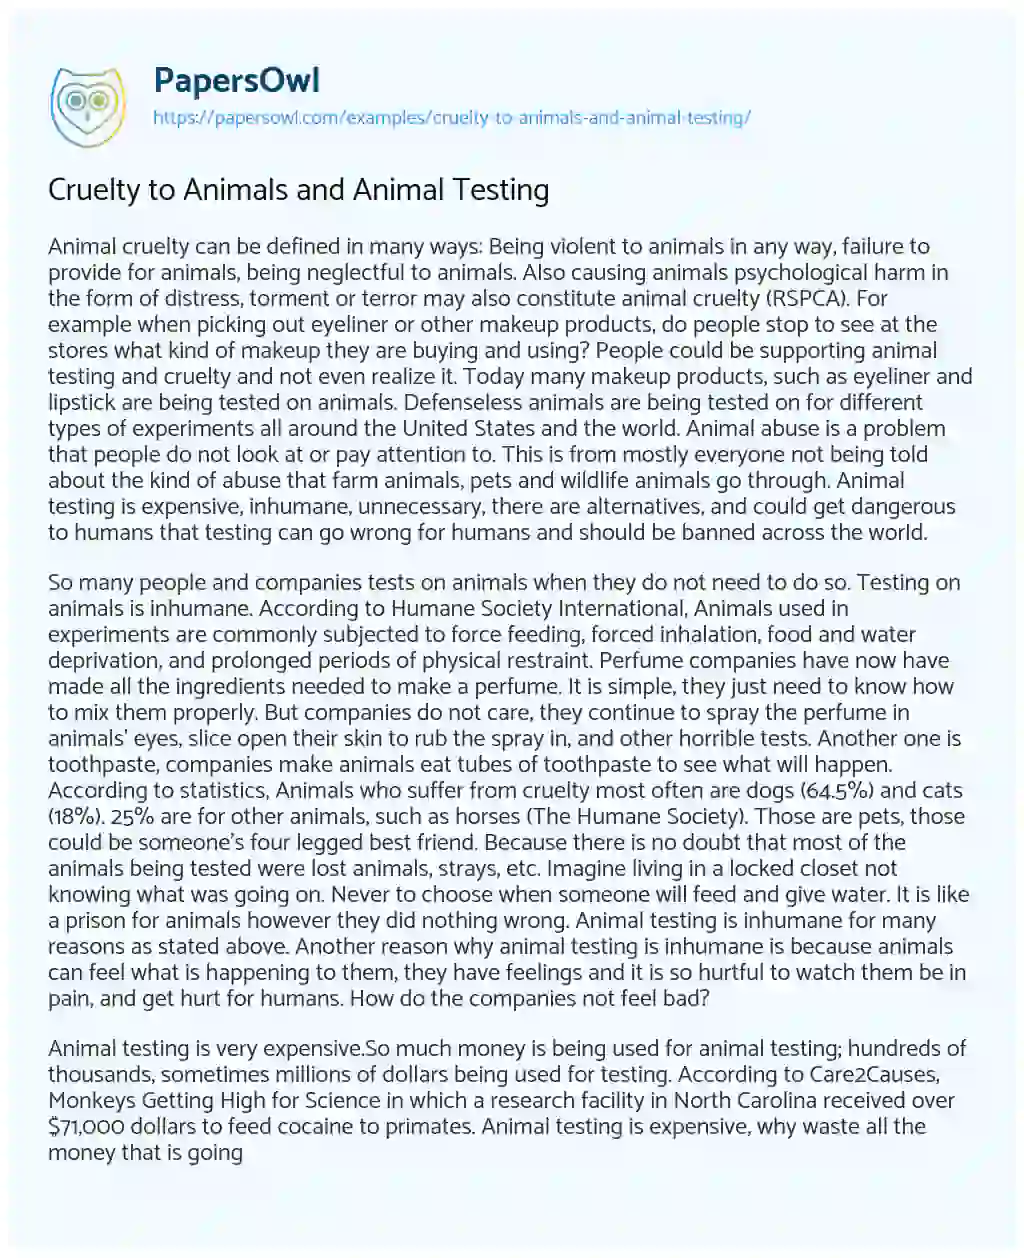 Essay on Cruelty to Animals and Animal Testing